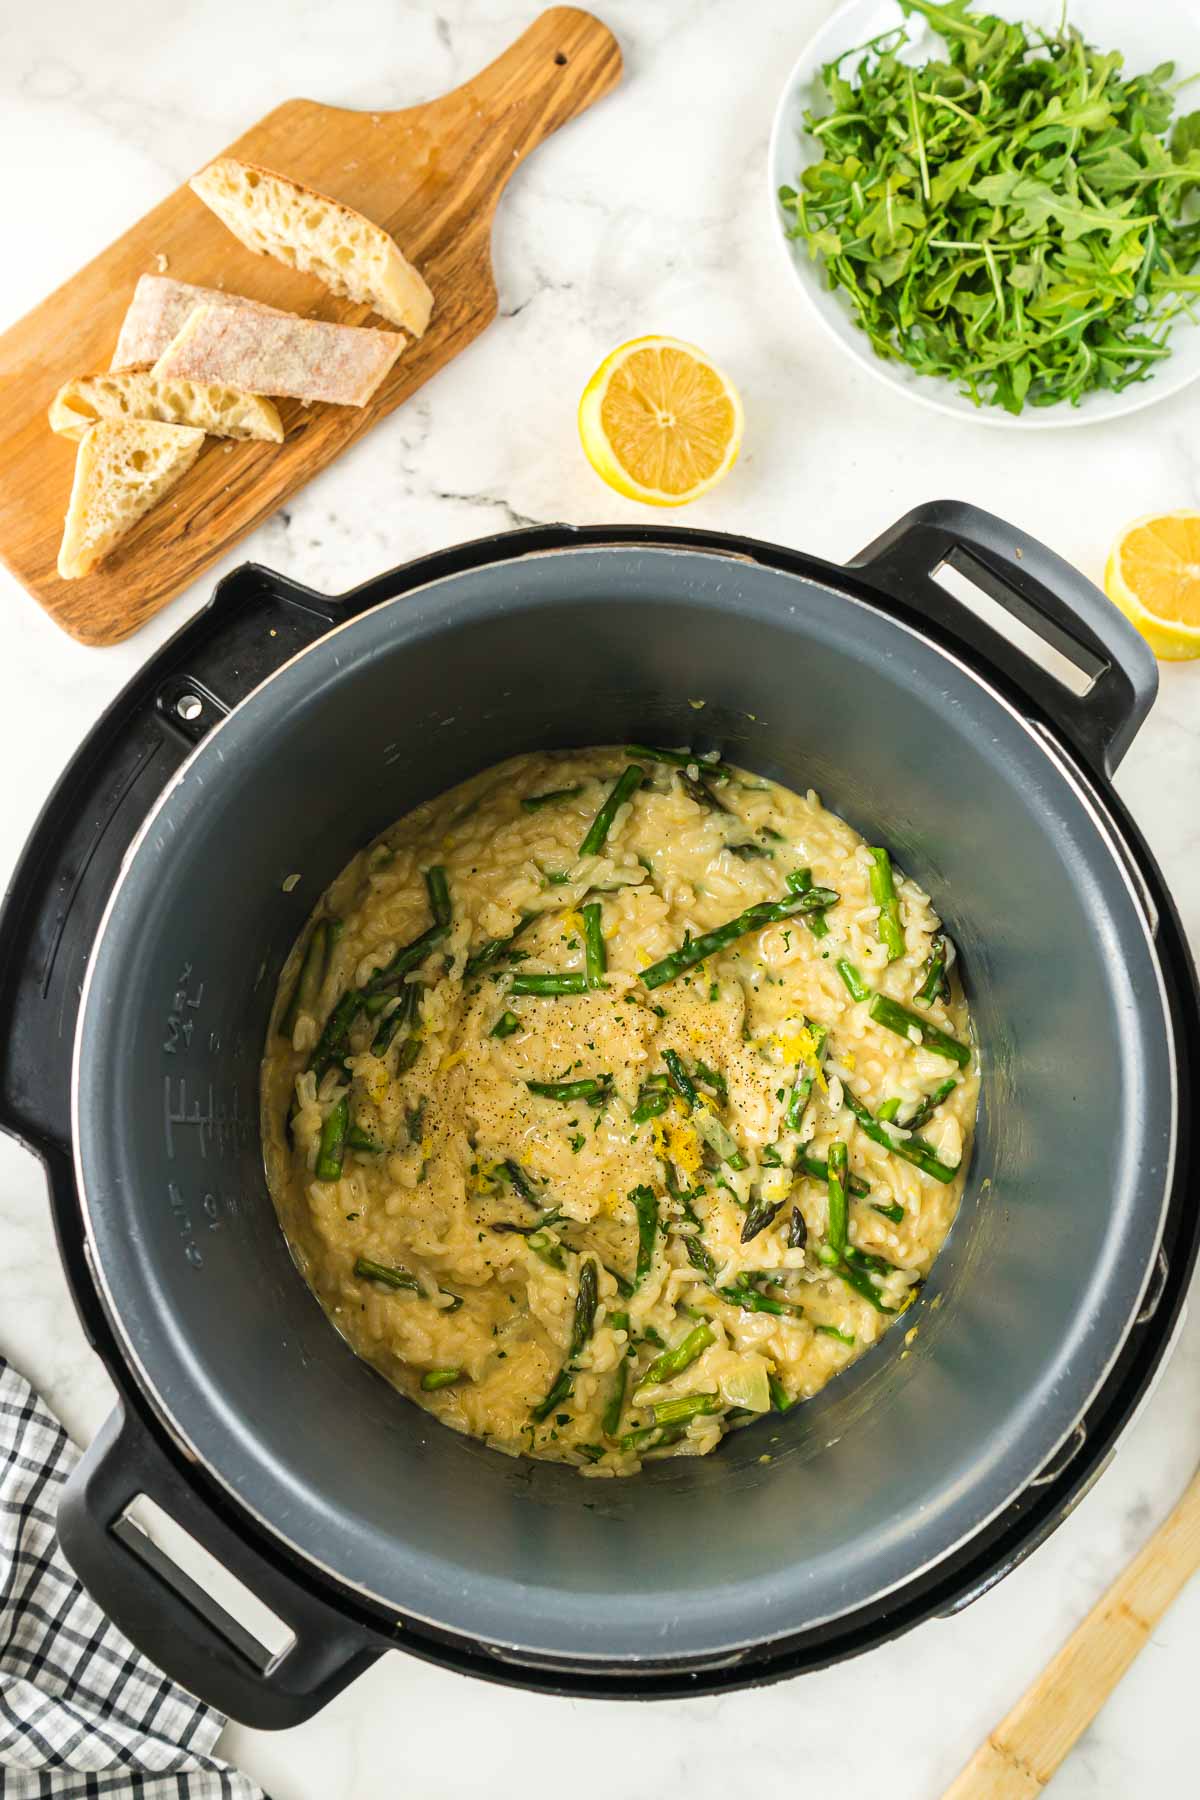 Instant pot risotto with asparagus ready to serve.